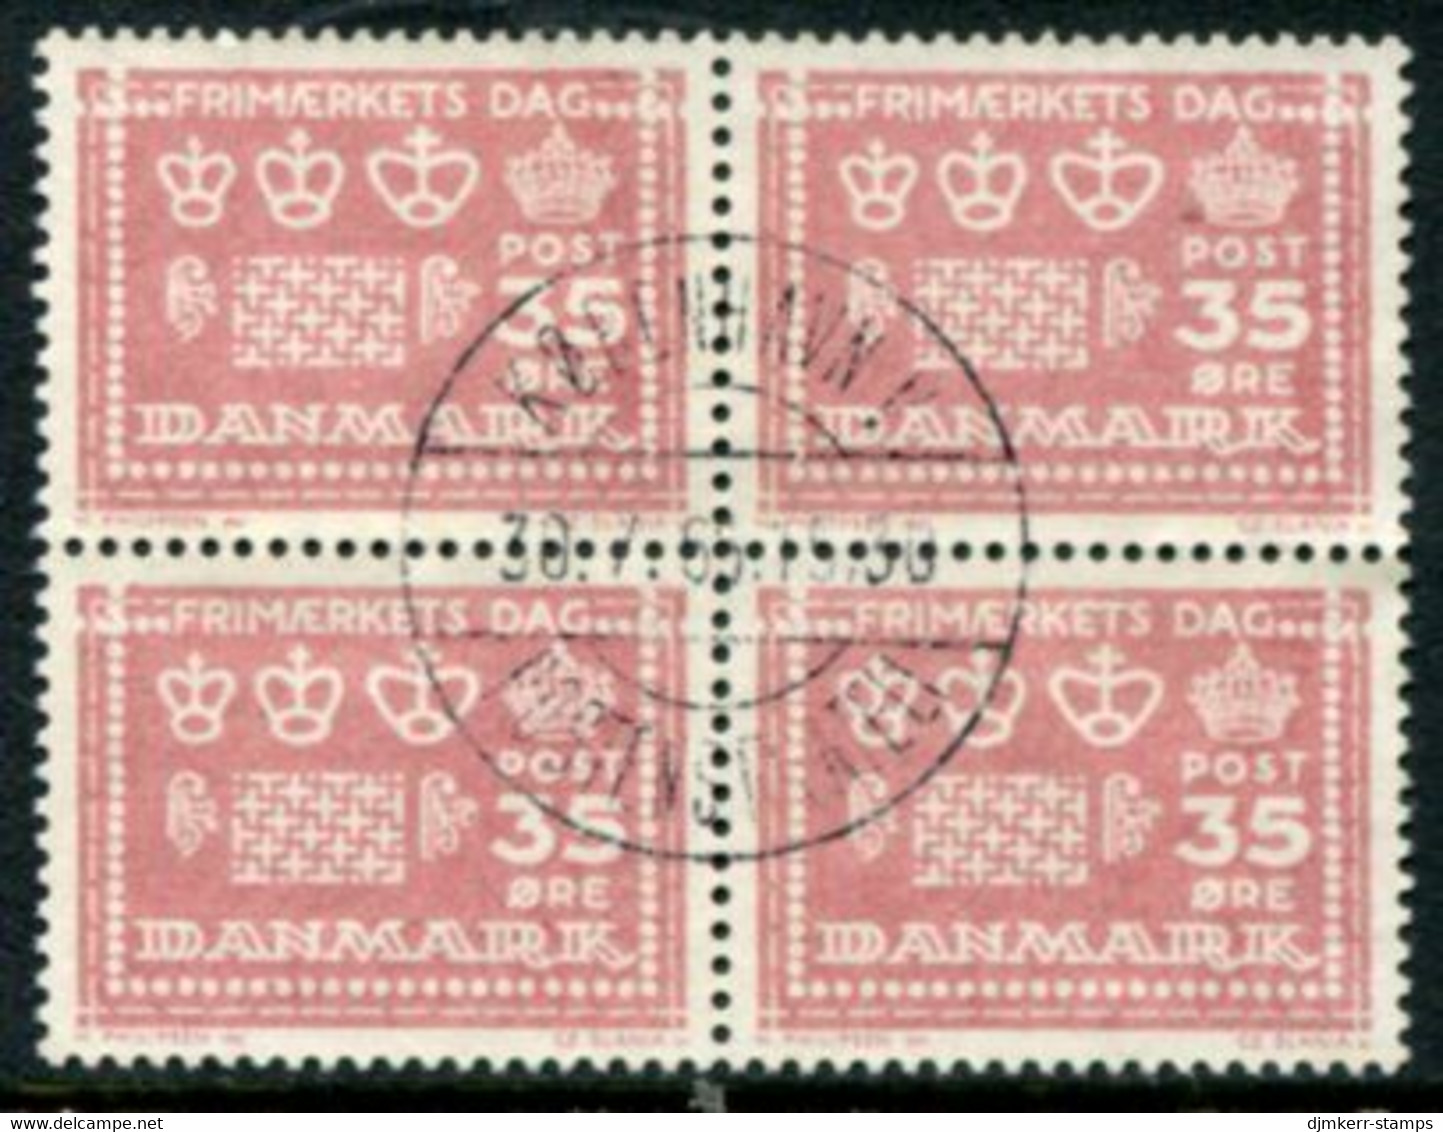 DENMARK 1964 Stamp Day Block Of 4 Used   Michel 425y - Usati